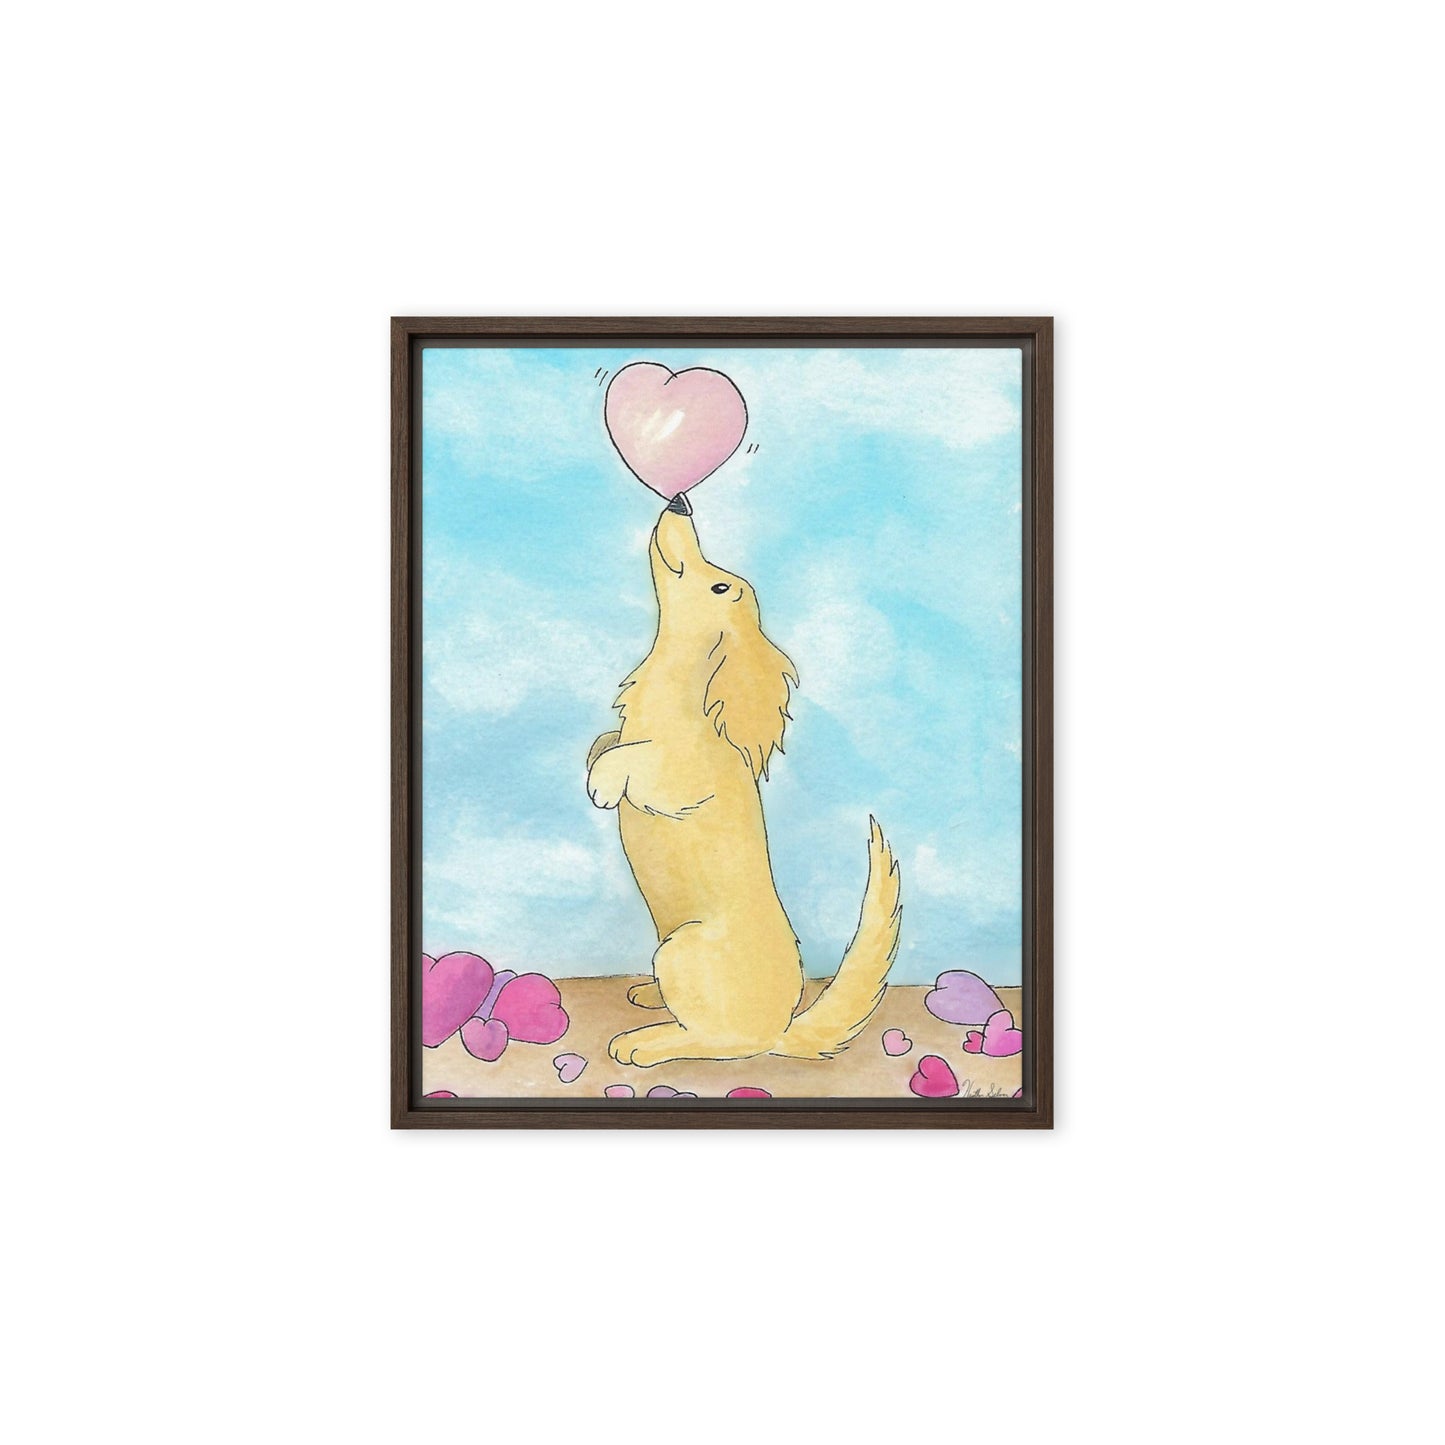 8 by 10 inch framed canvas Puppy Love print. The canvas is in a brown pine wood frame.